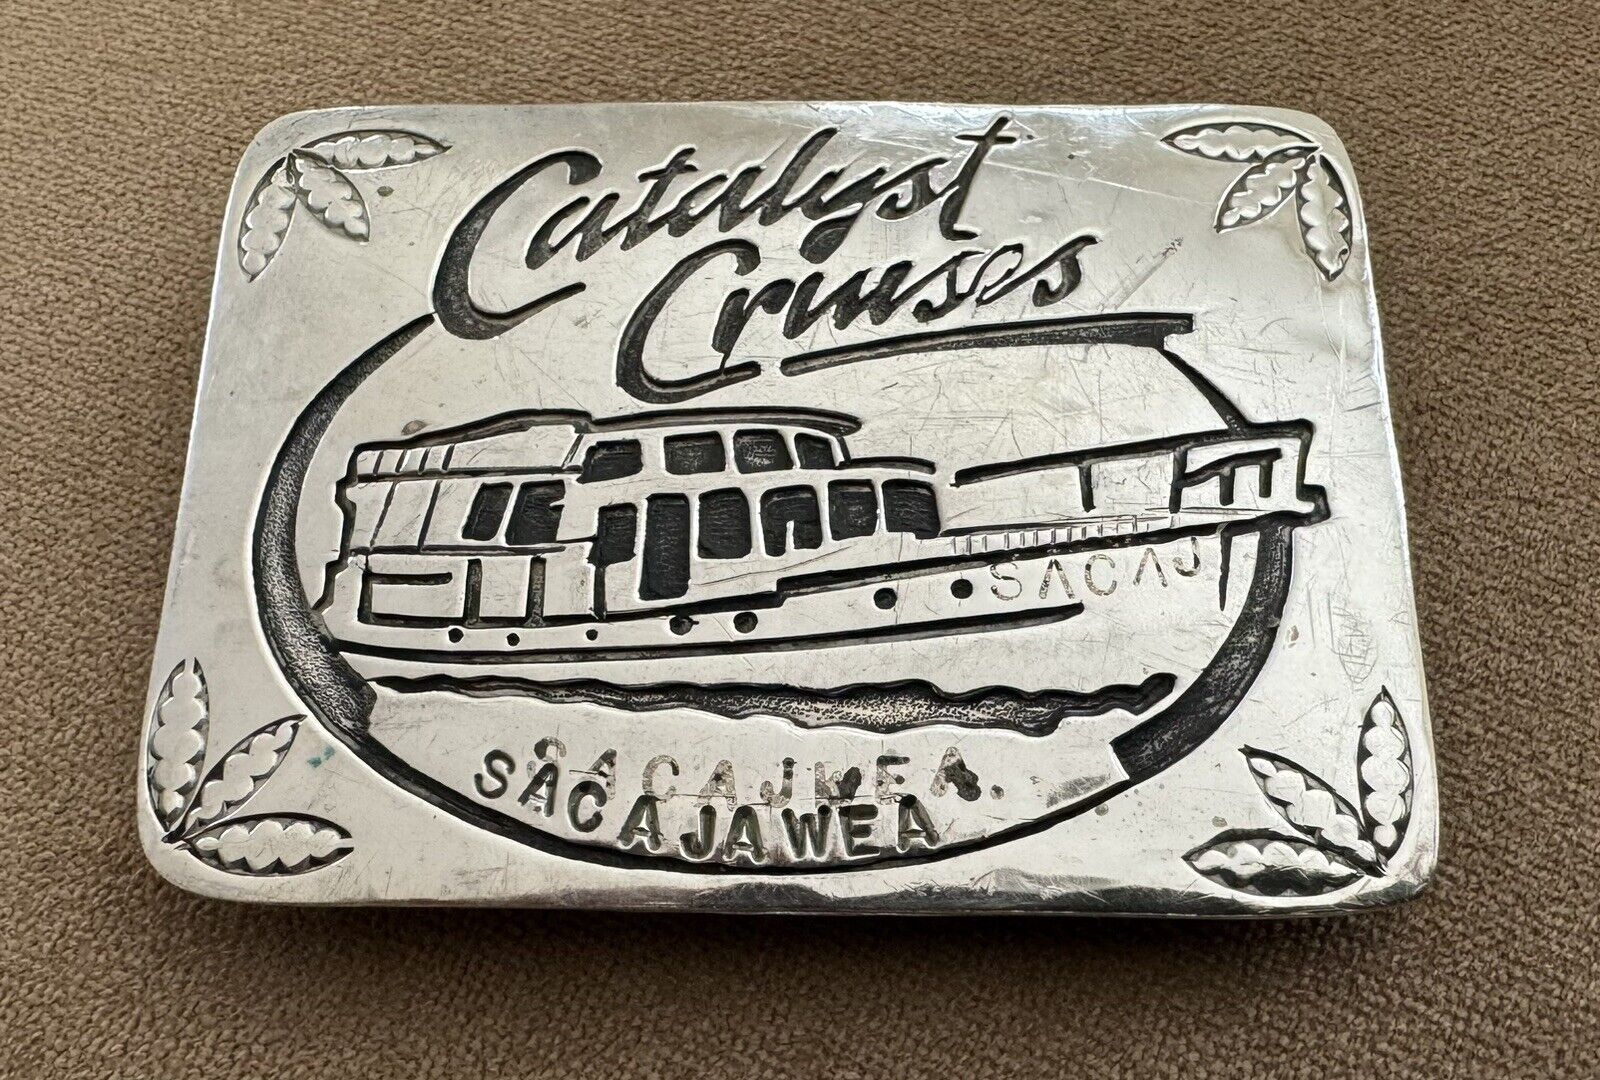 Vintage Sterling Silver Front Catalyst Cruises California Sacajawea Belt Buckle